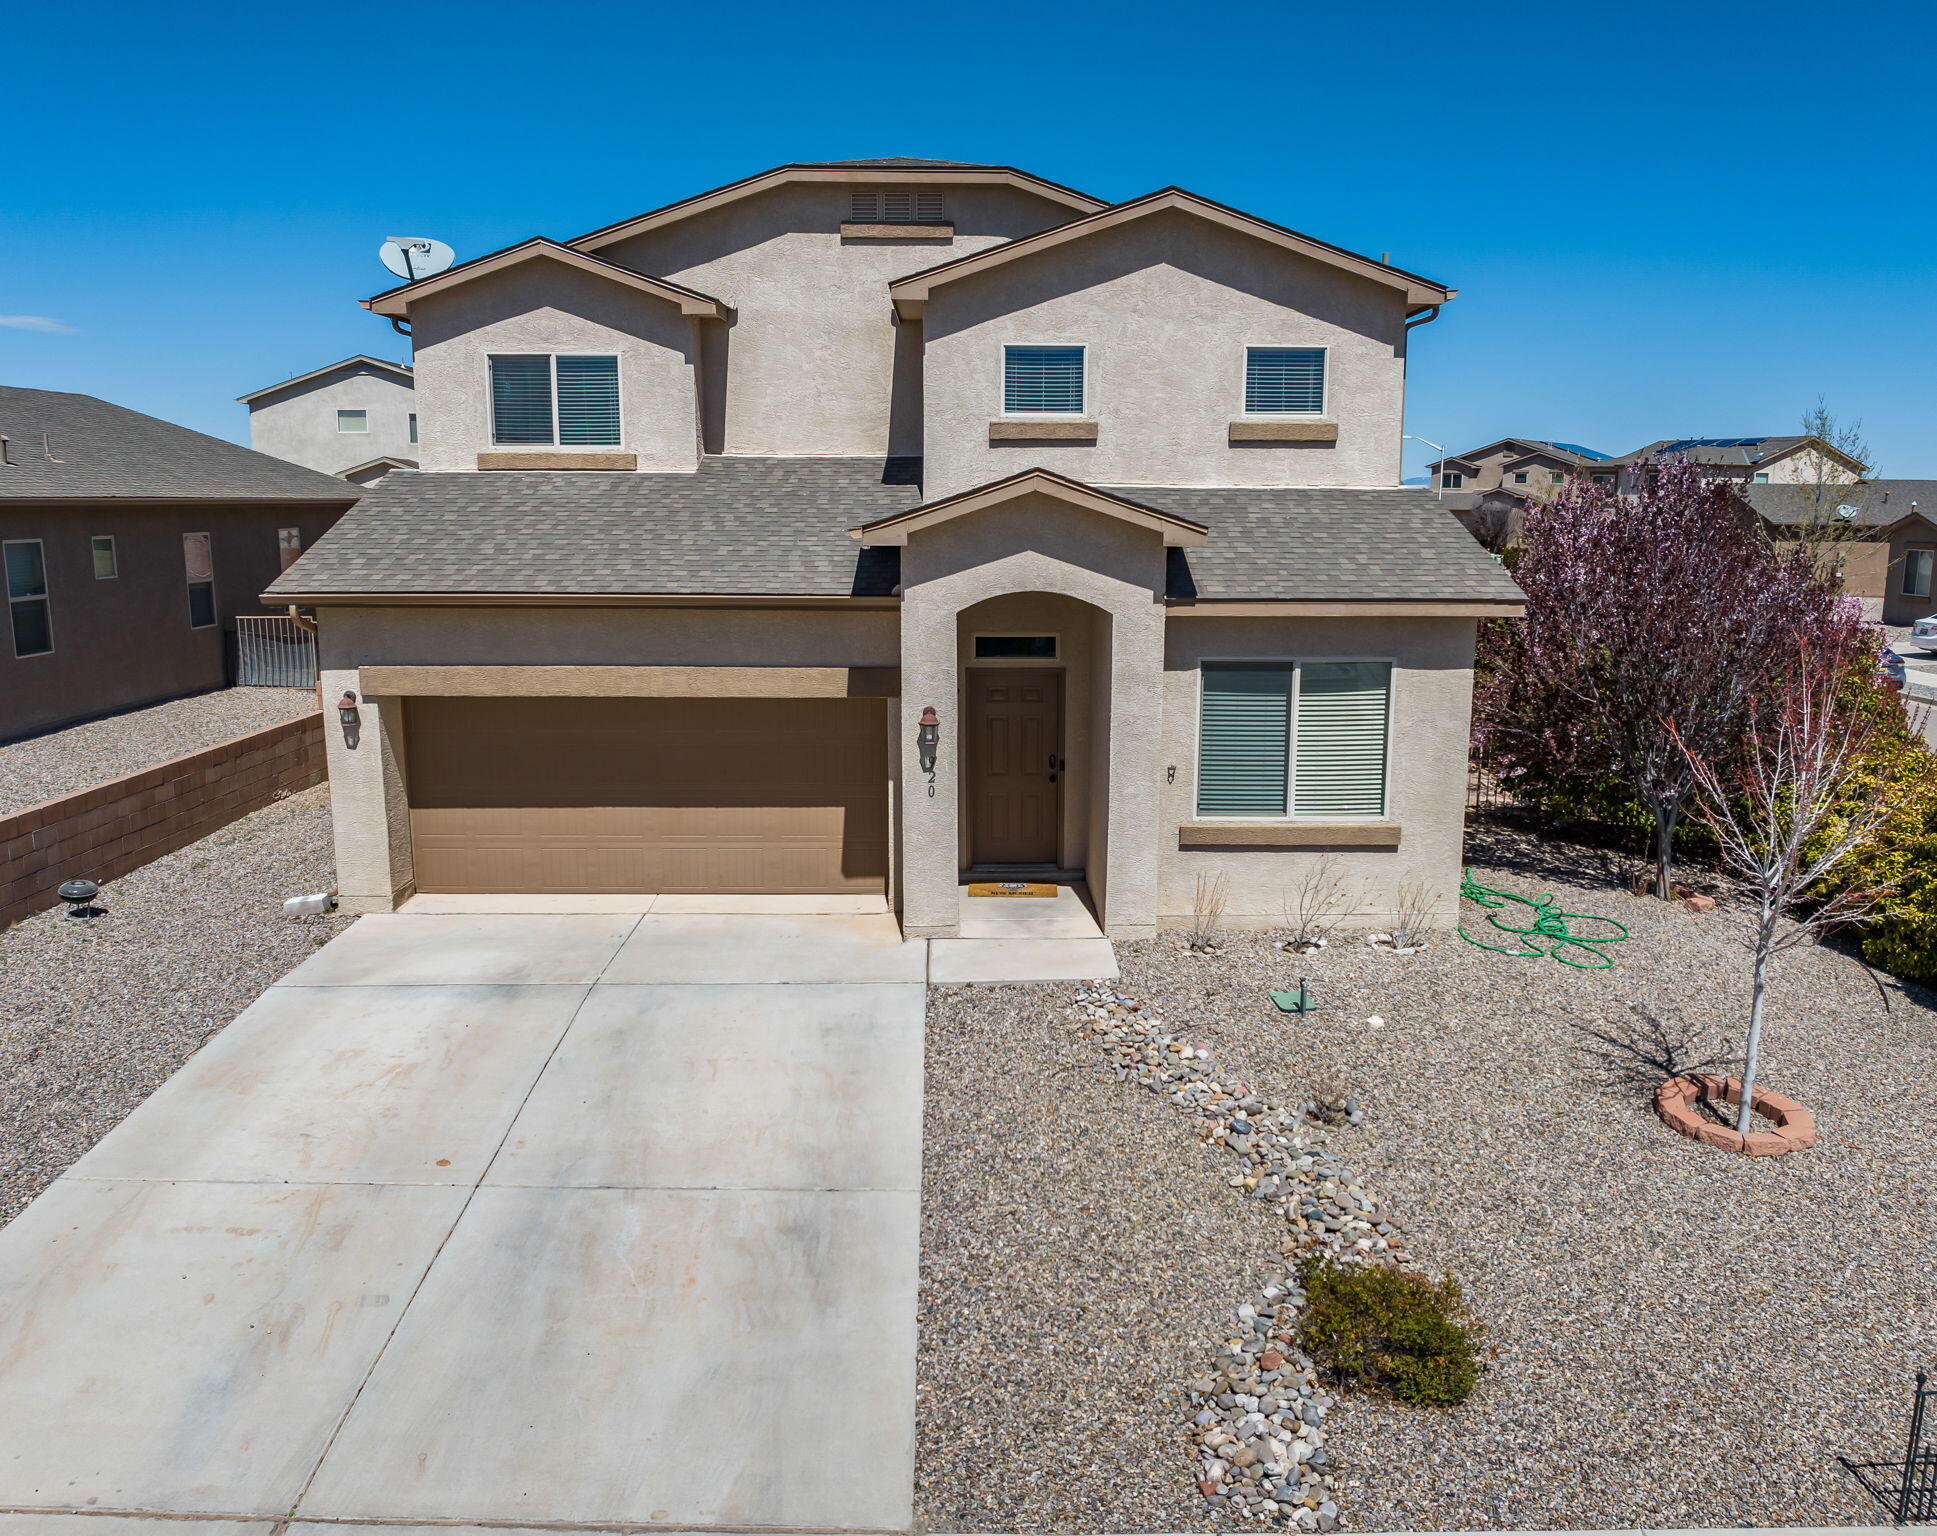 920 Crown Court NE, Rio Rancho, New Mexico 87124, 4 Bedrooms Bedrooms, ,4 BathroomsBathrooms,Residential,For Sale,920 Crown Court NE,1061254